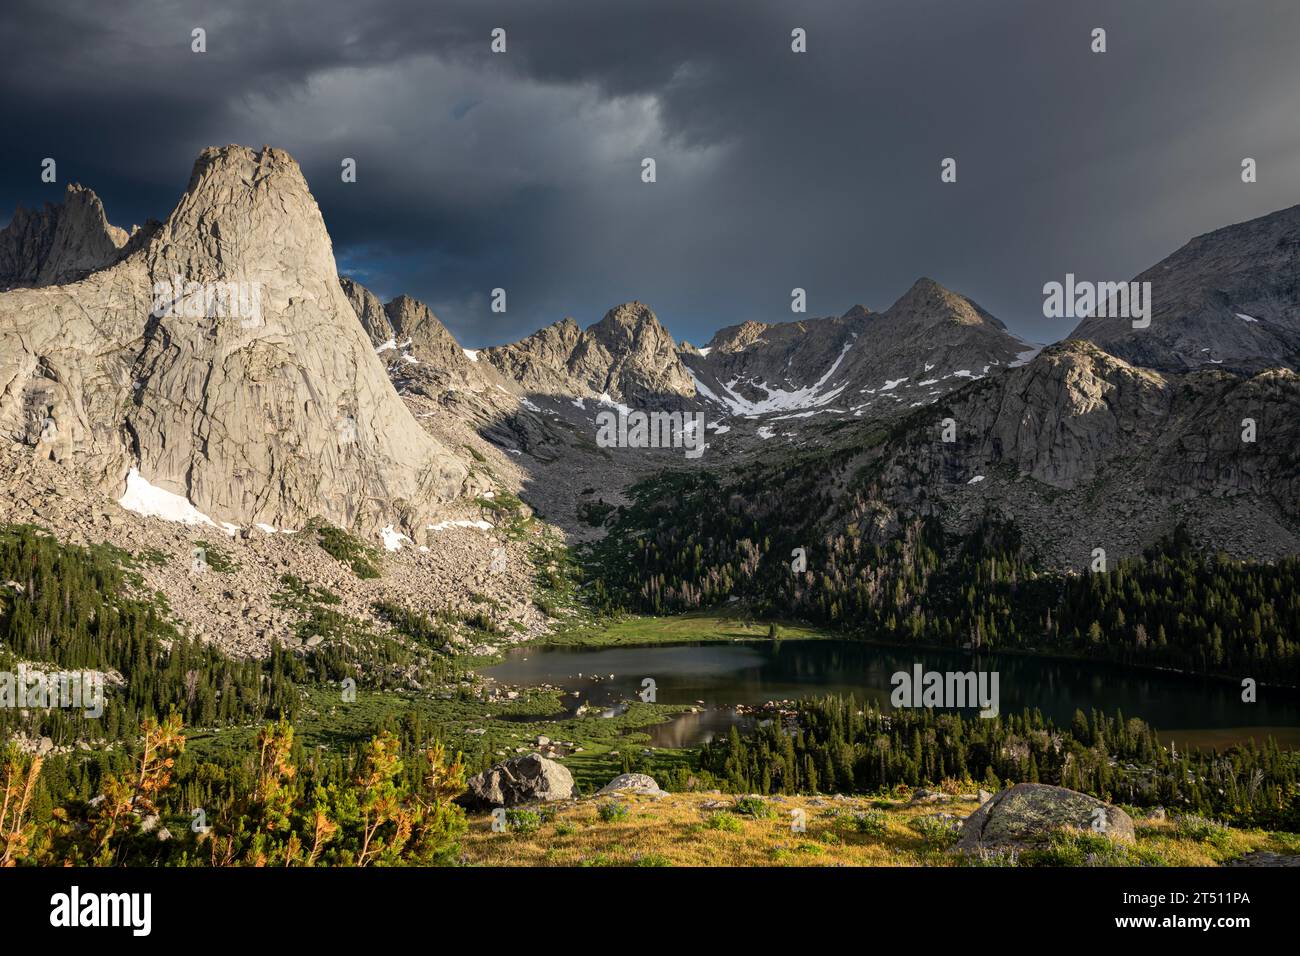 WY05594-00...WYOMING - Pingora Peak in Cirque of the Towers and Lonesome Lake in the Popo Agie Wilderness area of the Wind River Range. Stock Photo